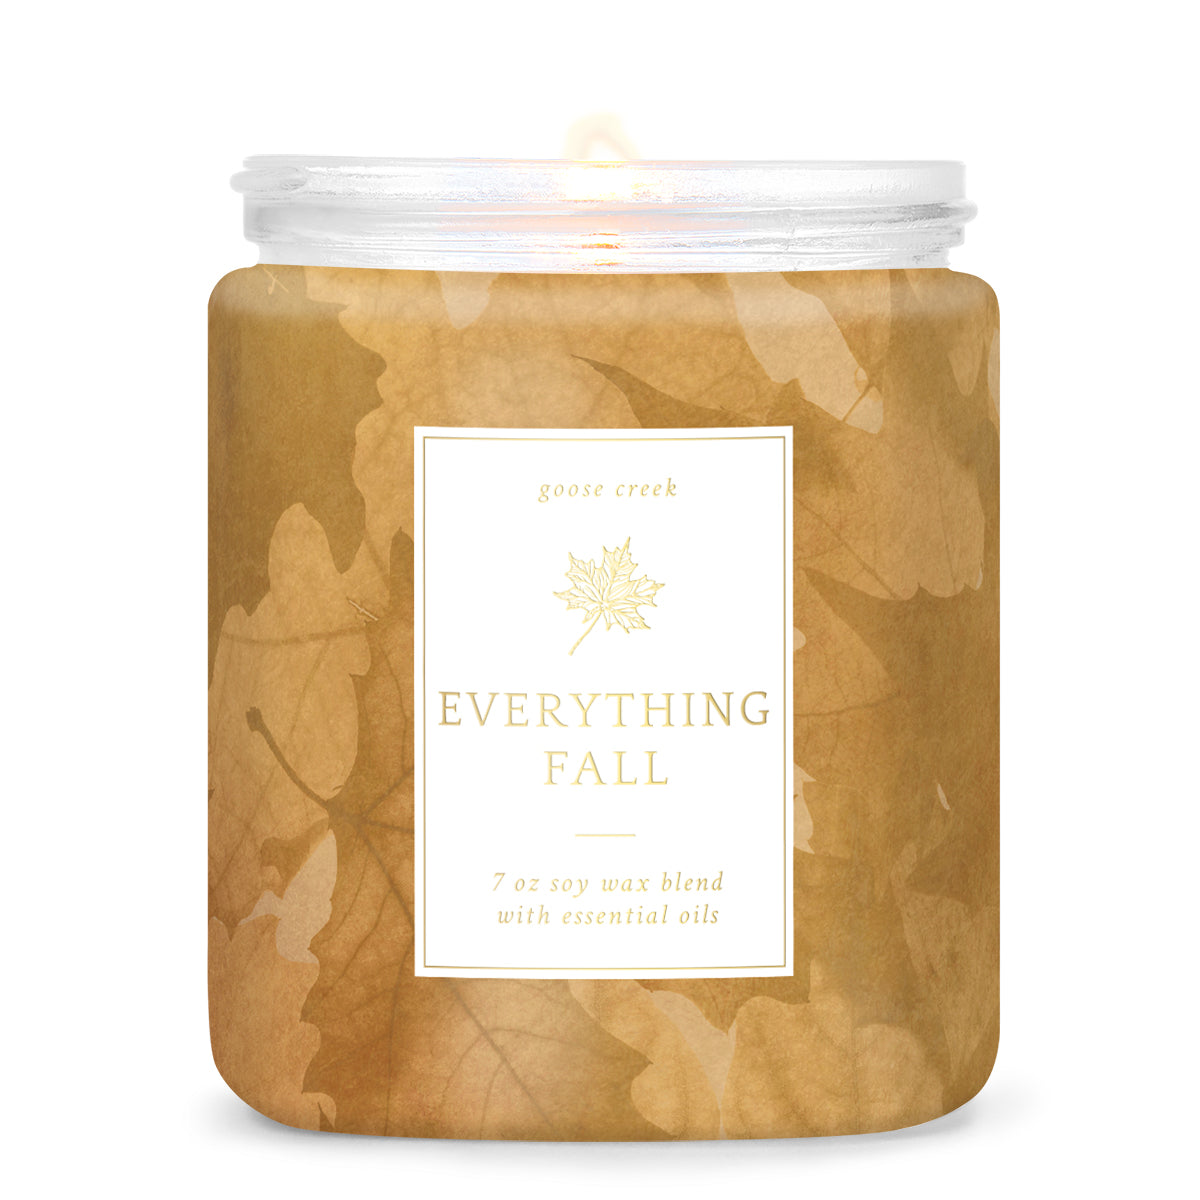 Everything Fall 7oz Single Wick Candle